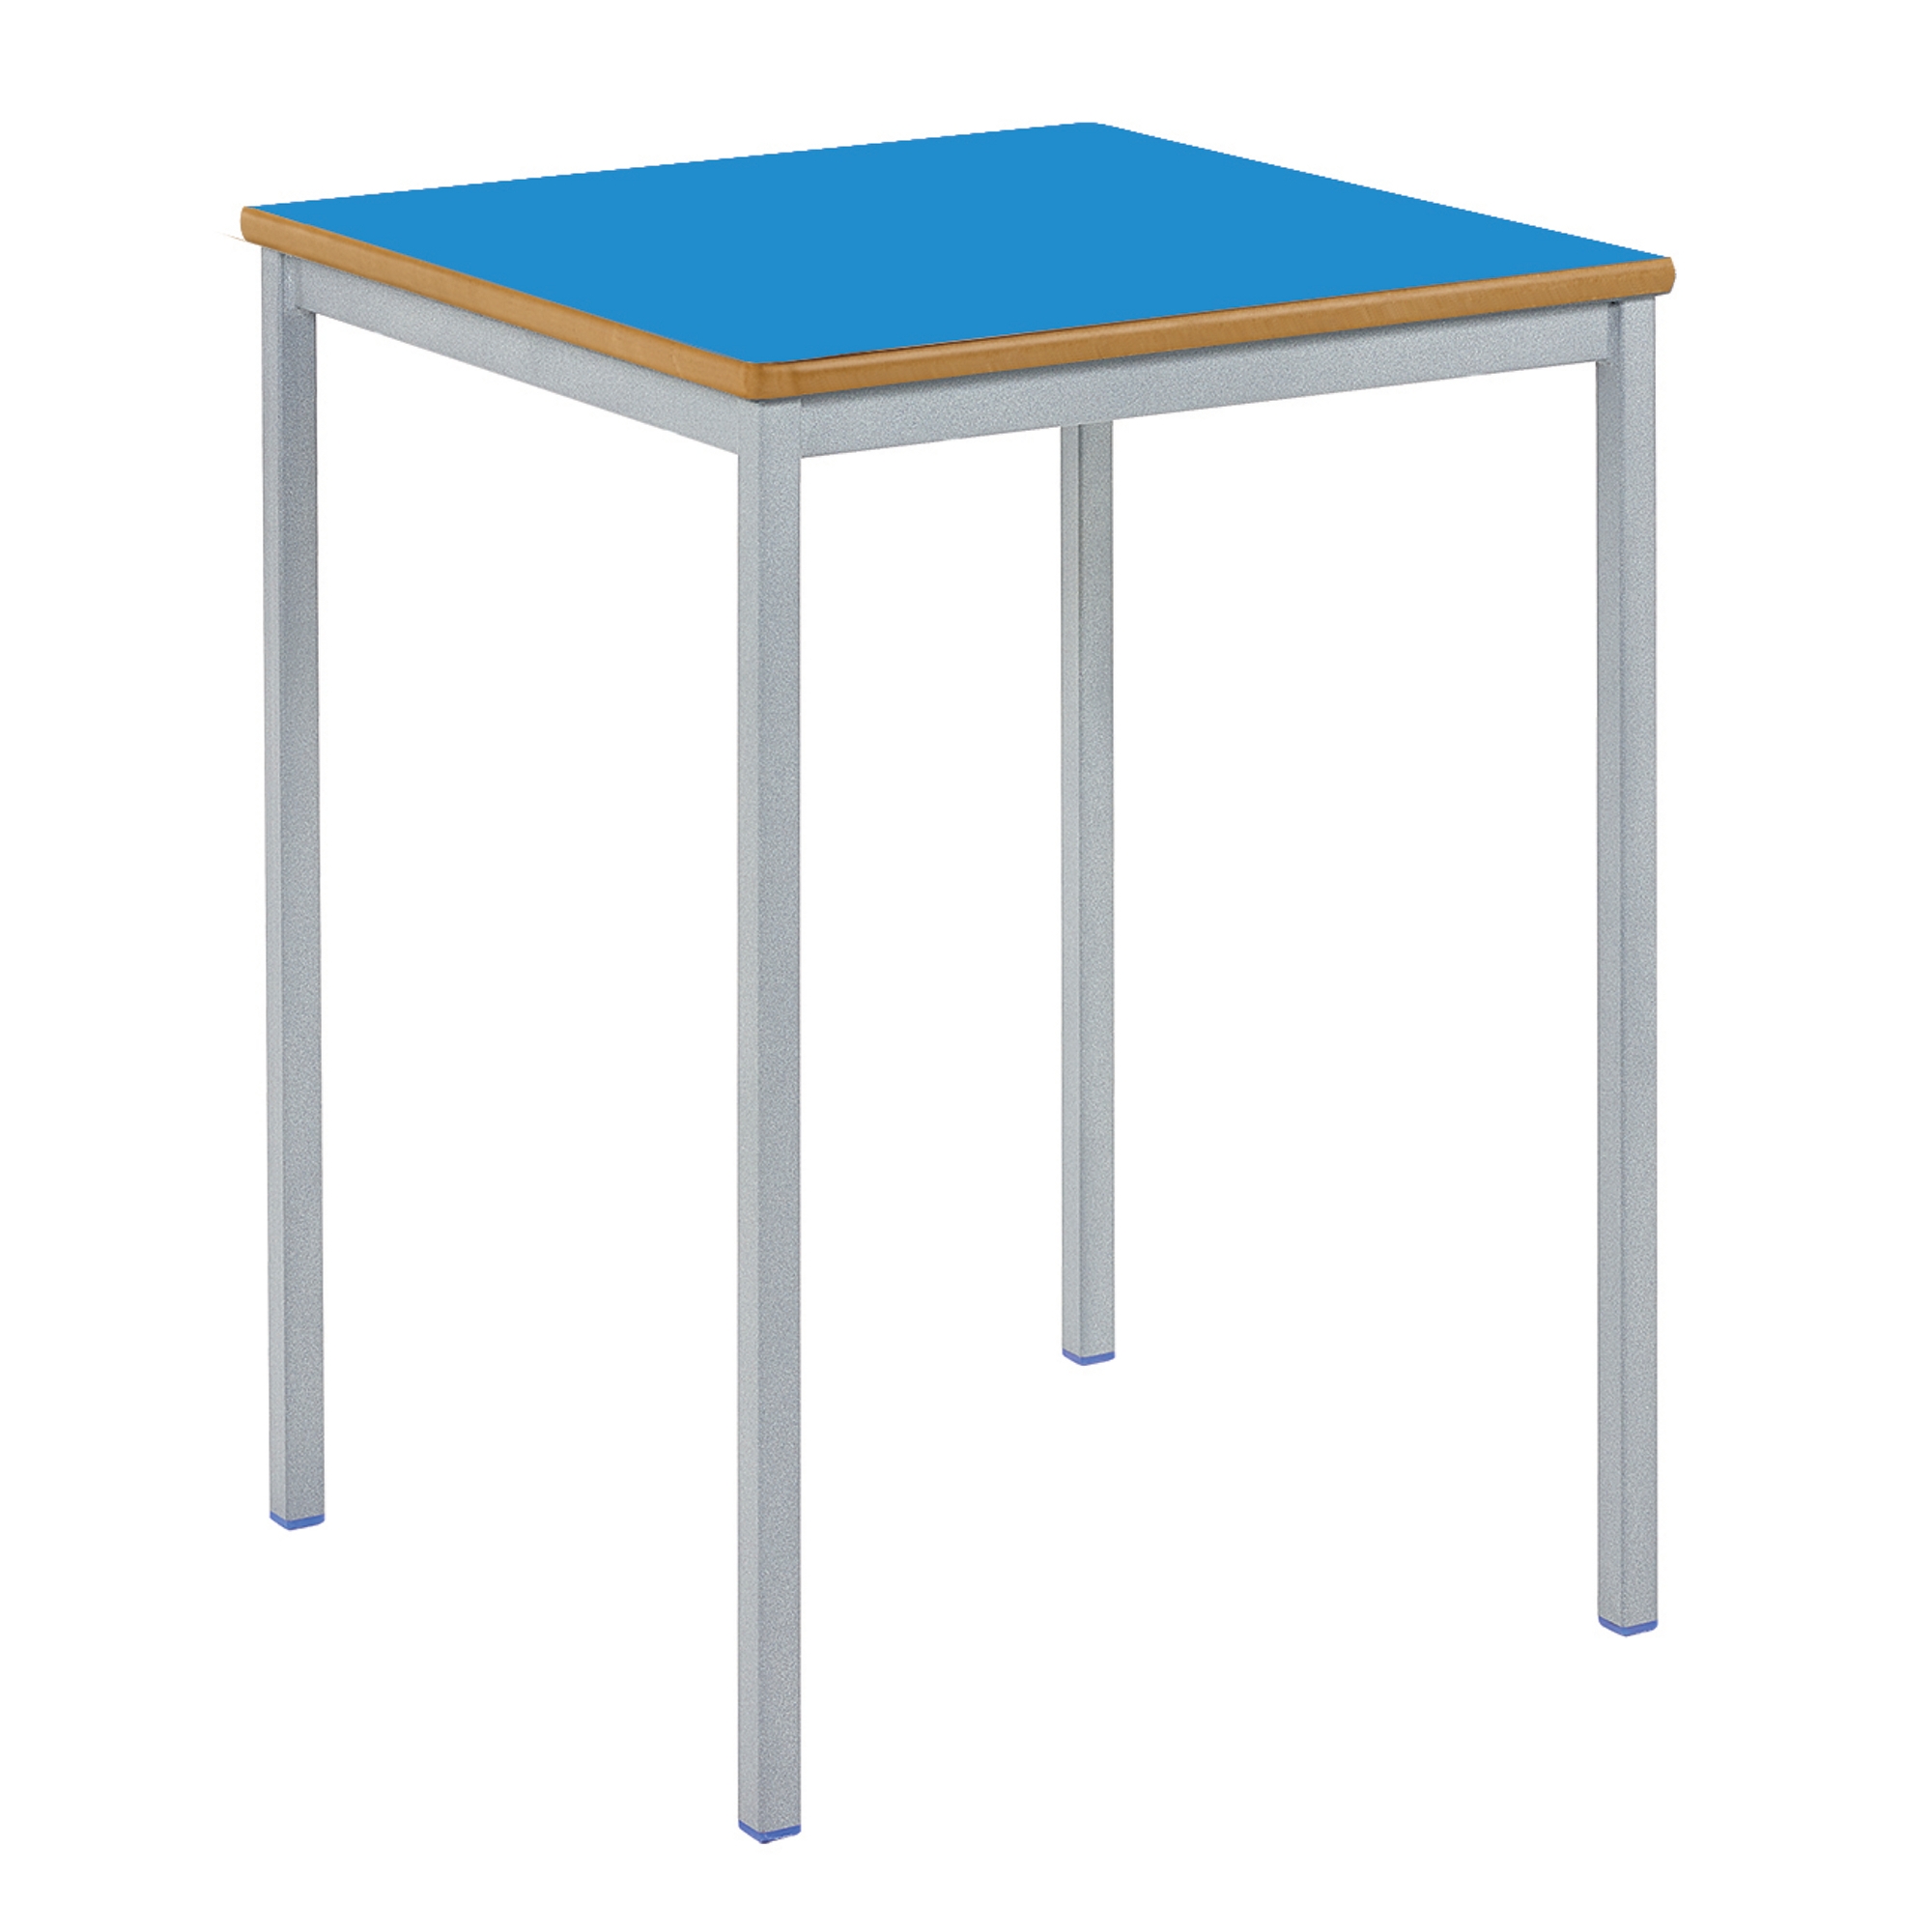 Classmates Square Fully Welded Classroom Table - 600 x 600 x 710mm - Blue